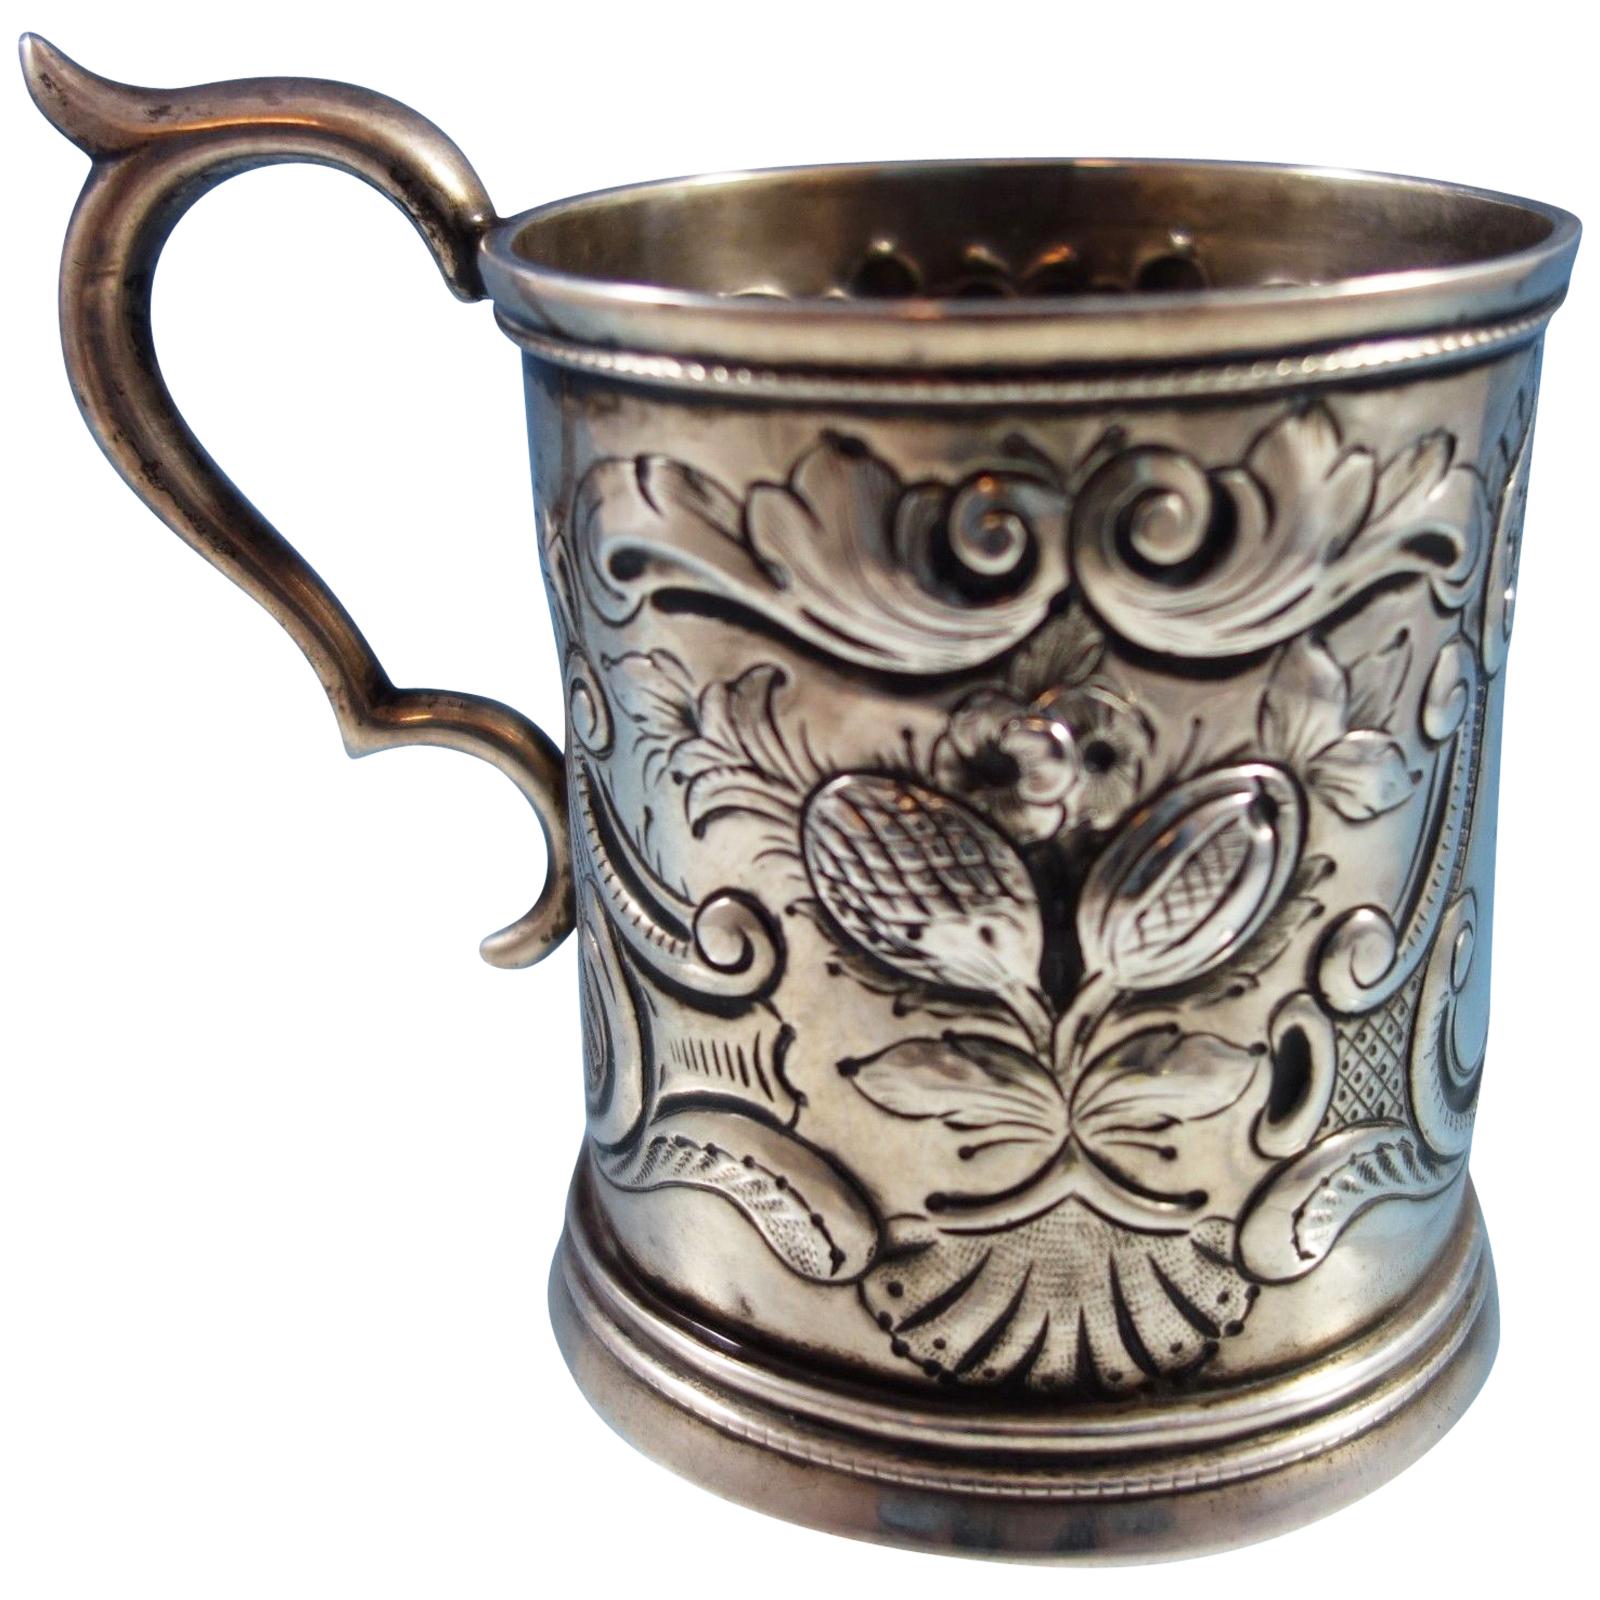 Coin Silver Baby Cup with Repoussed Fruit and Scrollwork